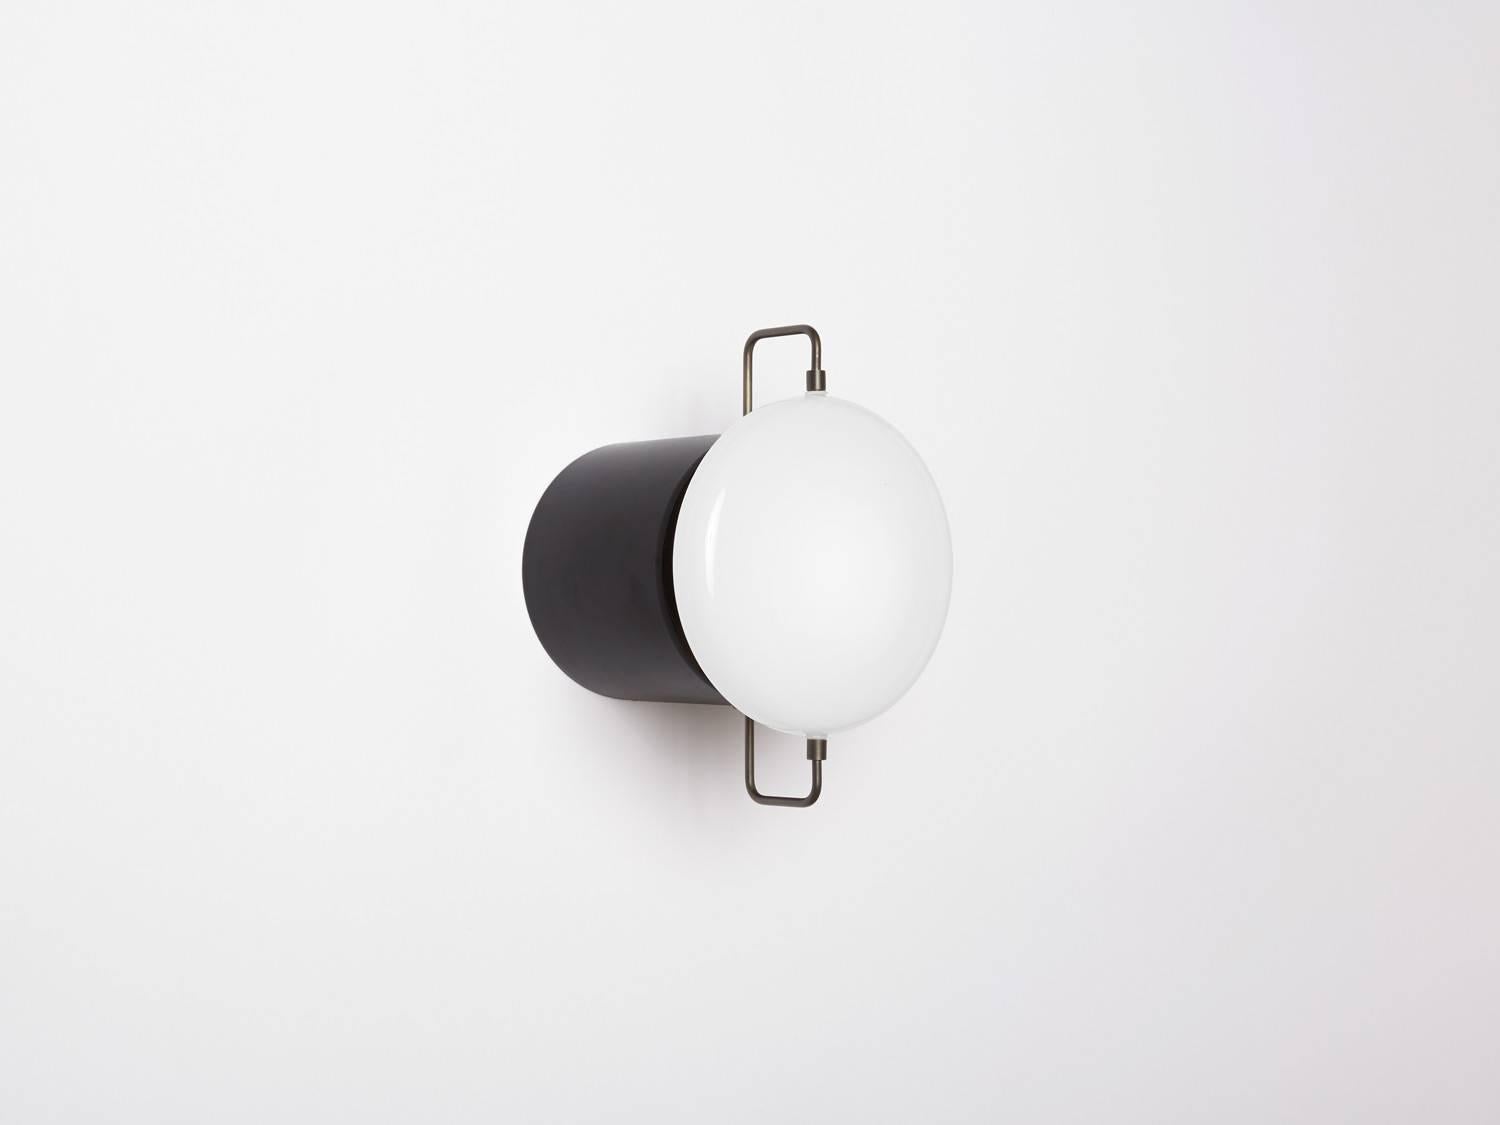 Park I can be utilized as a wall sconce or flush-mount fixture. Referencing porcelain fixtures produced during the pre-war period, the fixture incorporates delicate metal rods that suspend a handblown milk glass form. Made in the USA, UL listed.